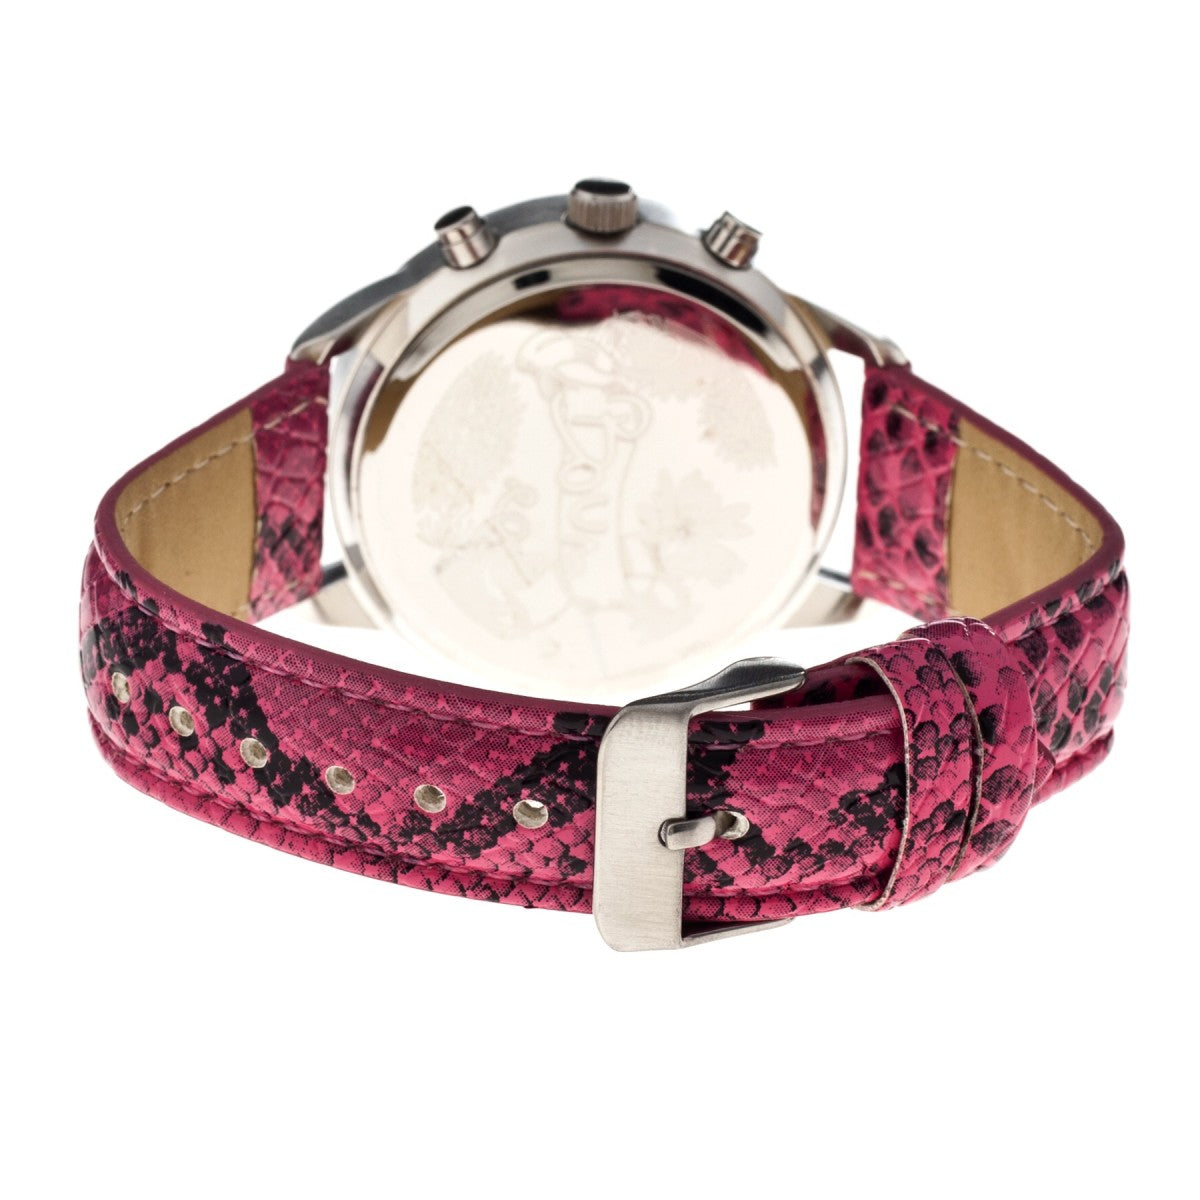 Boum Serpent Leather-Band Ladies Watch w/ Day/Date - Silver/Pink - BOUBM2403